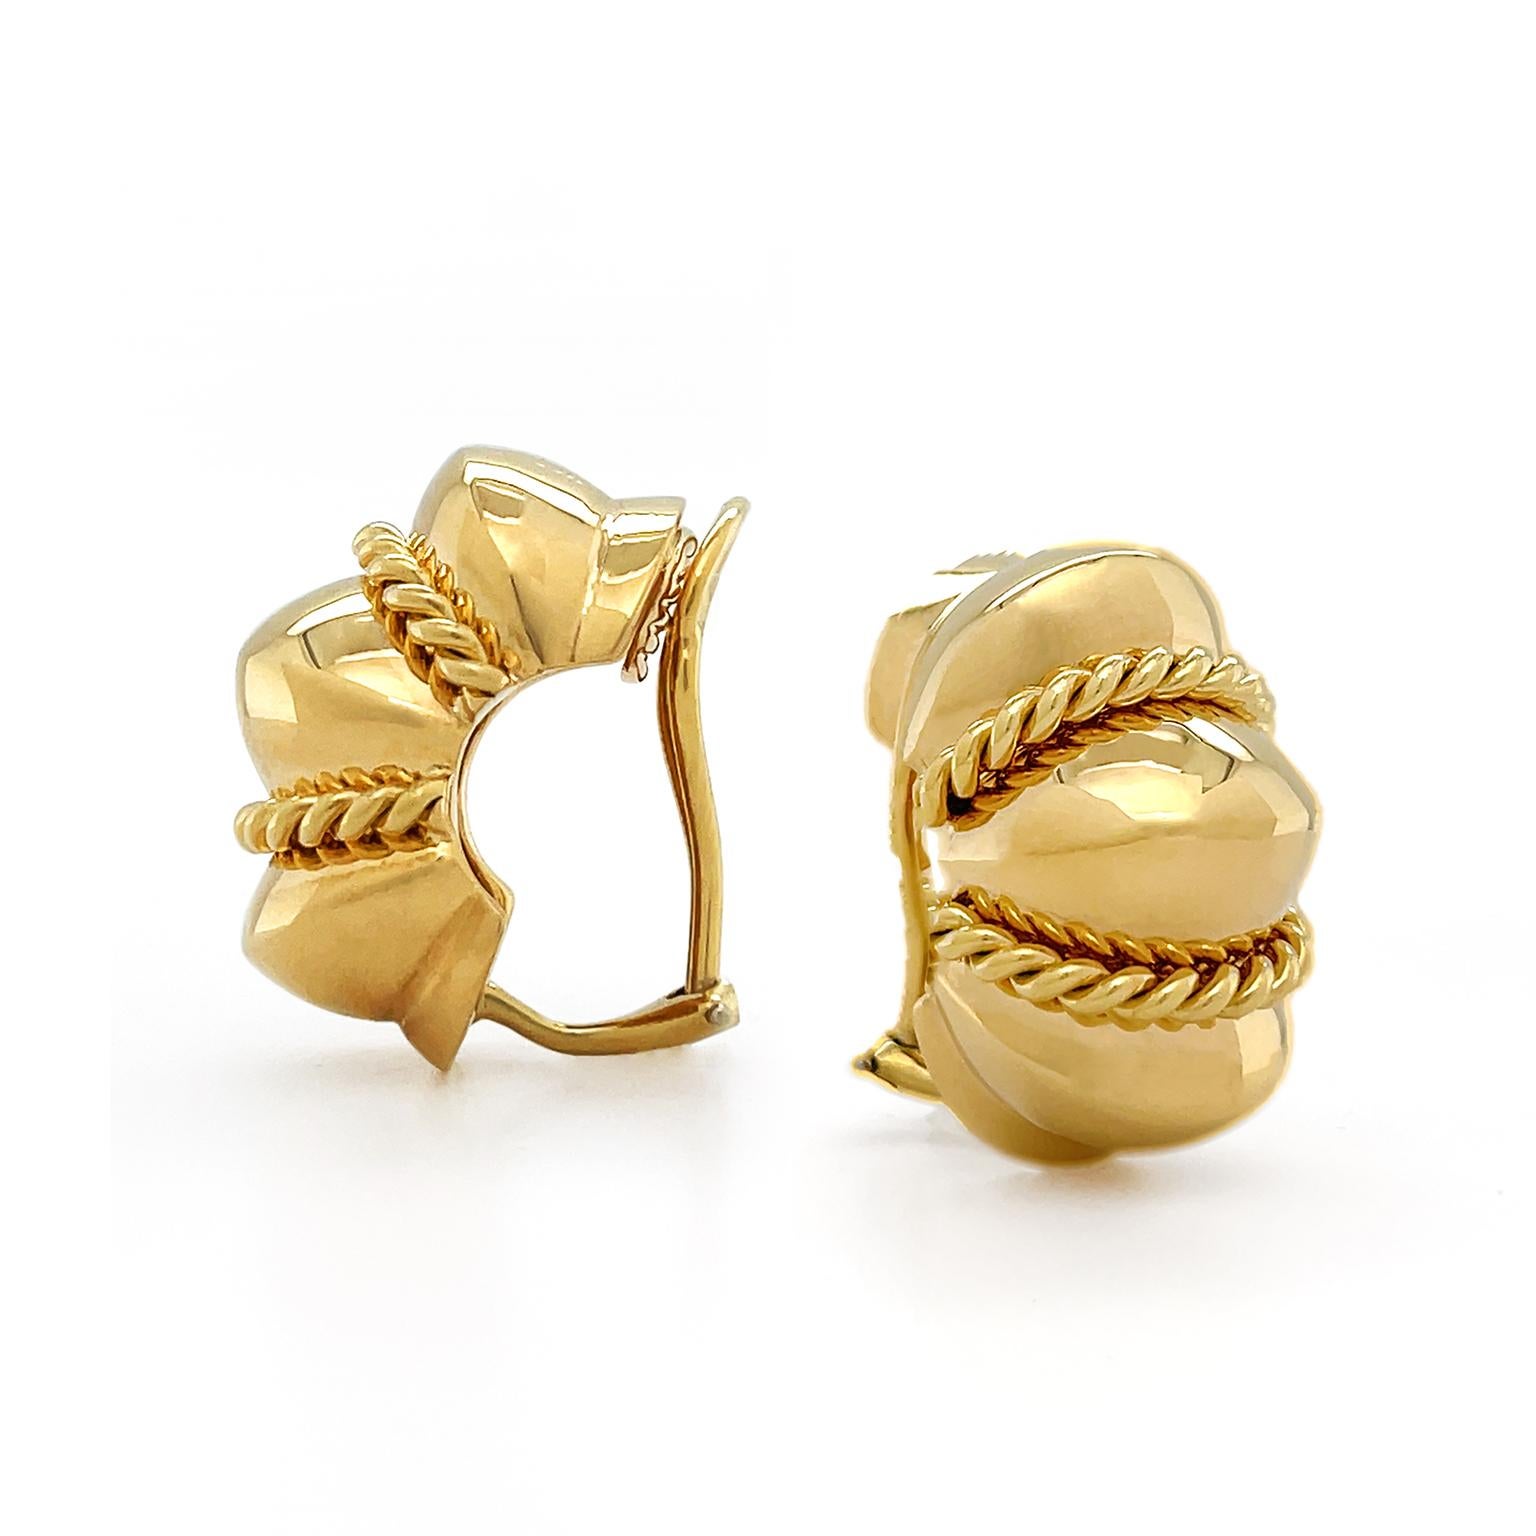 The warmth of vivid gold combines with the elegant shrimp design. 18k yellow gold is molded into the base with three raised structures and smaller indentations. A gold braid wraps around two indentations for a textured highlight, while a high polish